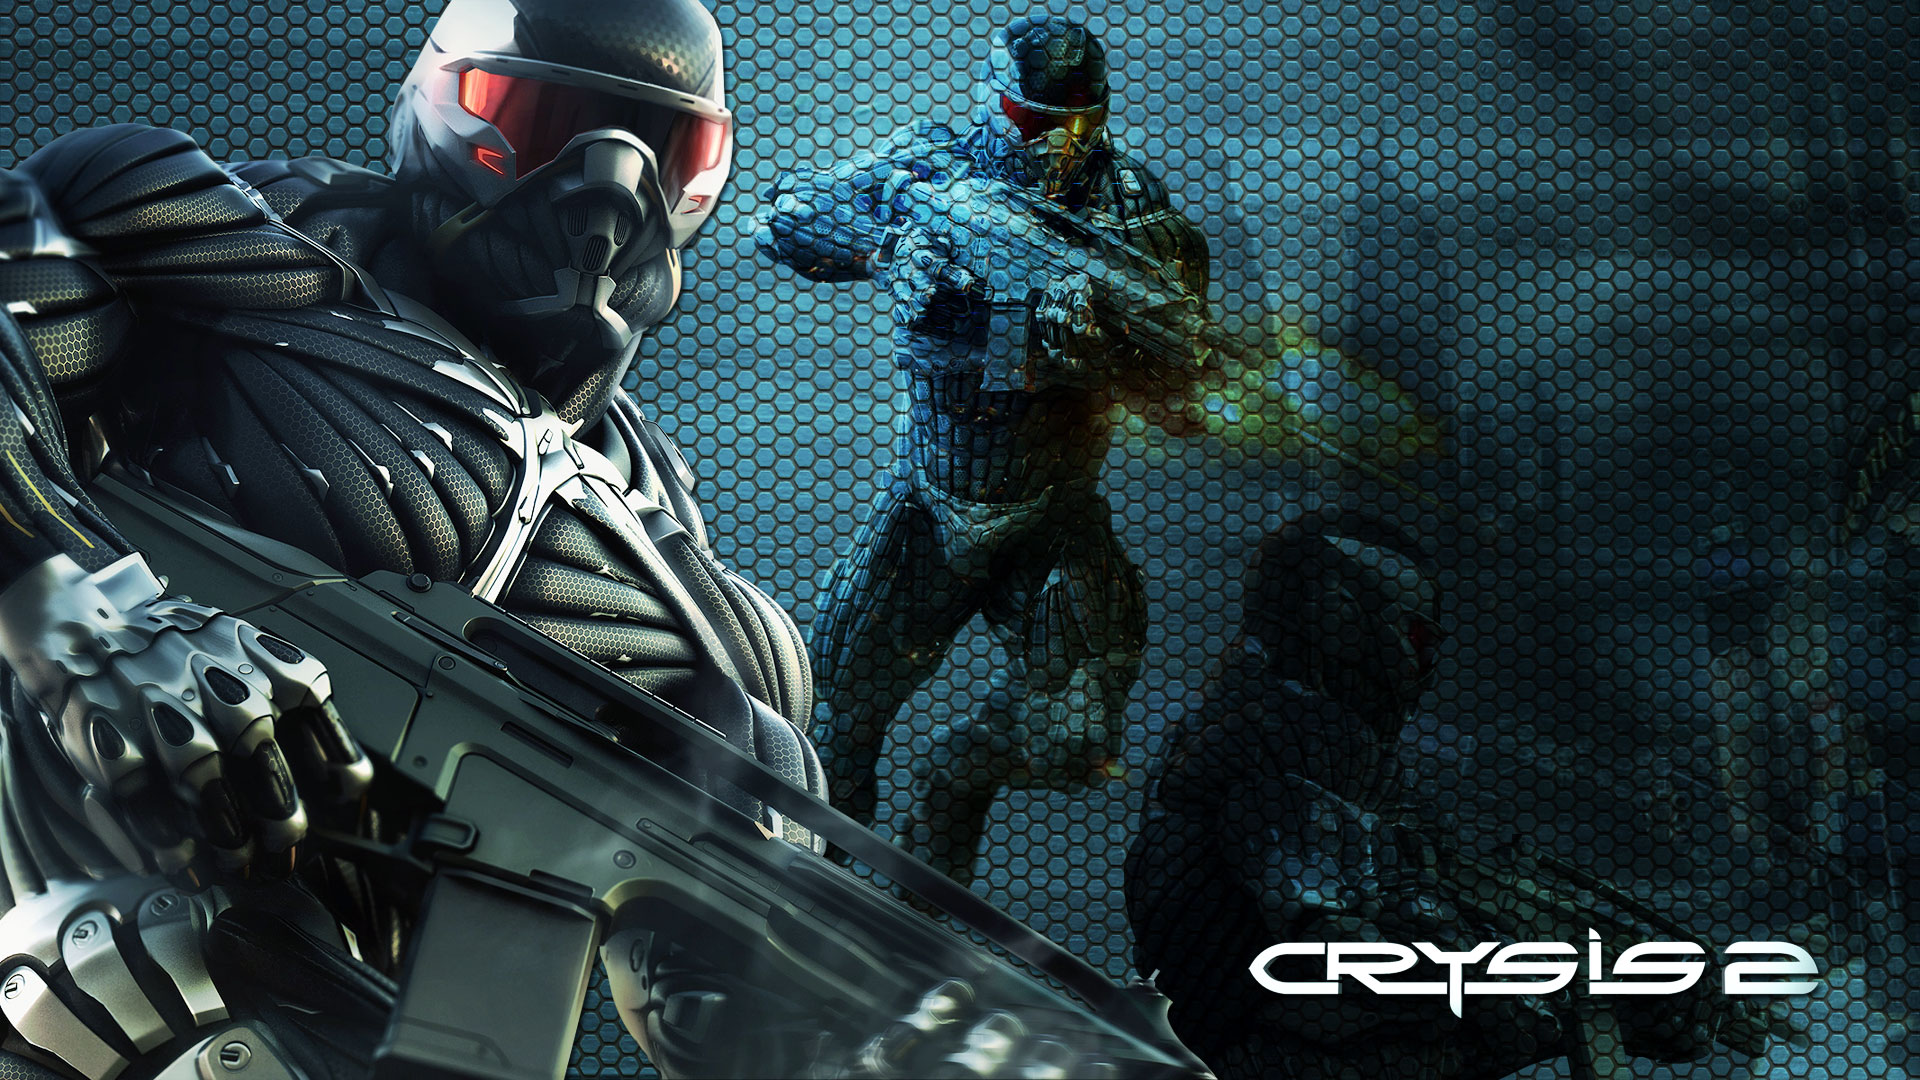 Video Games Crysis Crysis 2 Weapon Soldier 1920x1080